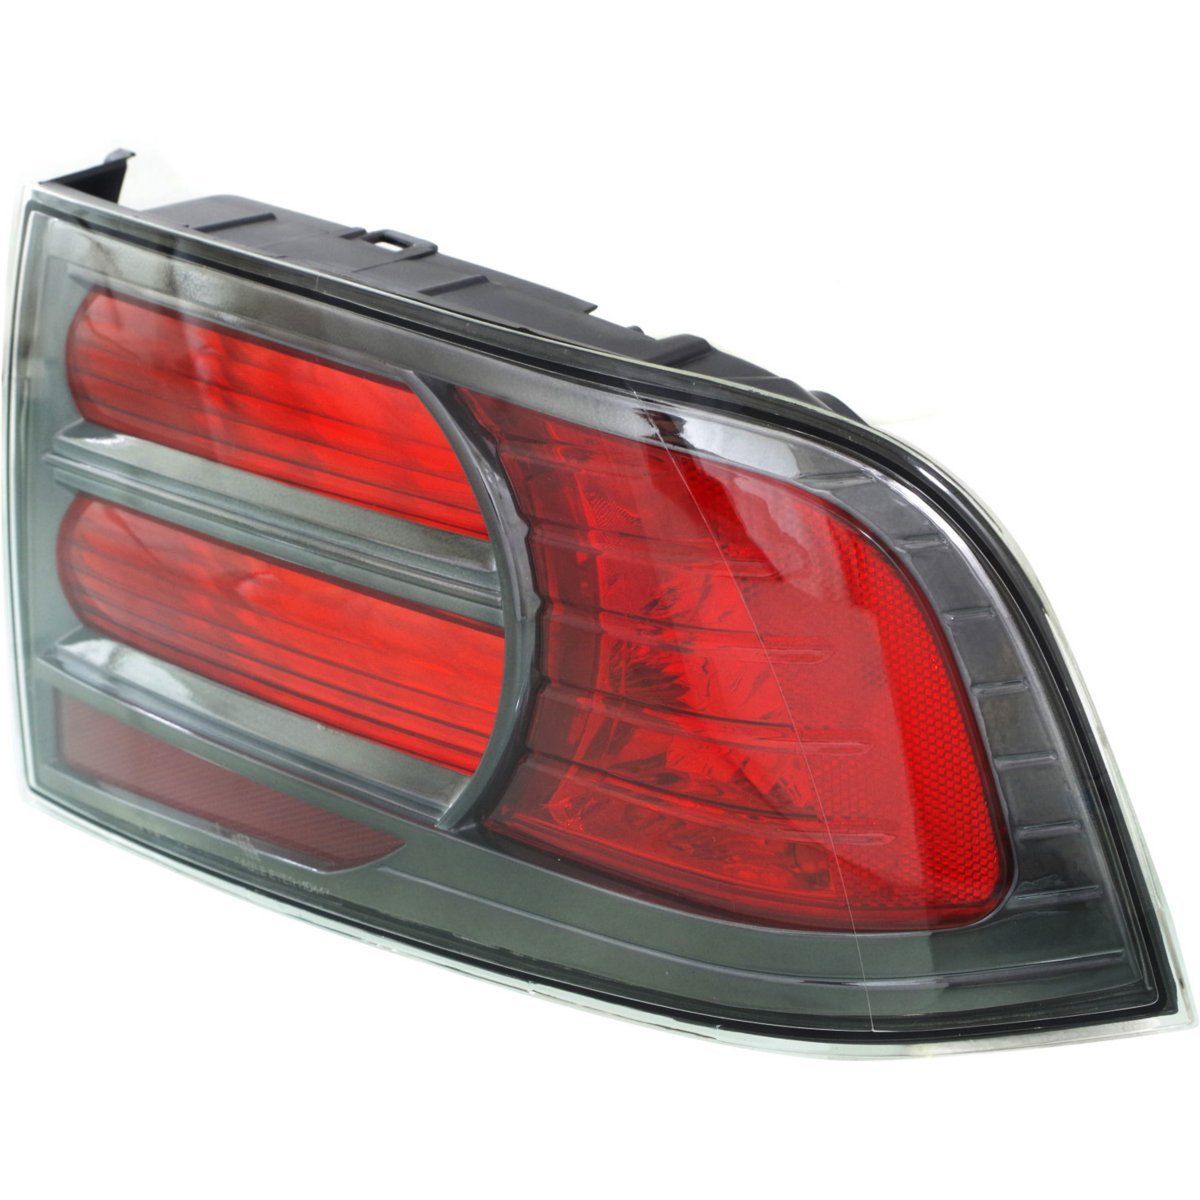 2007 Acura Tl Type S Tail Lights